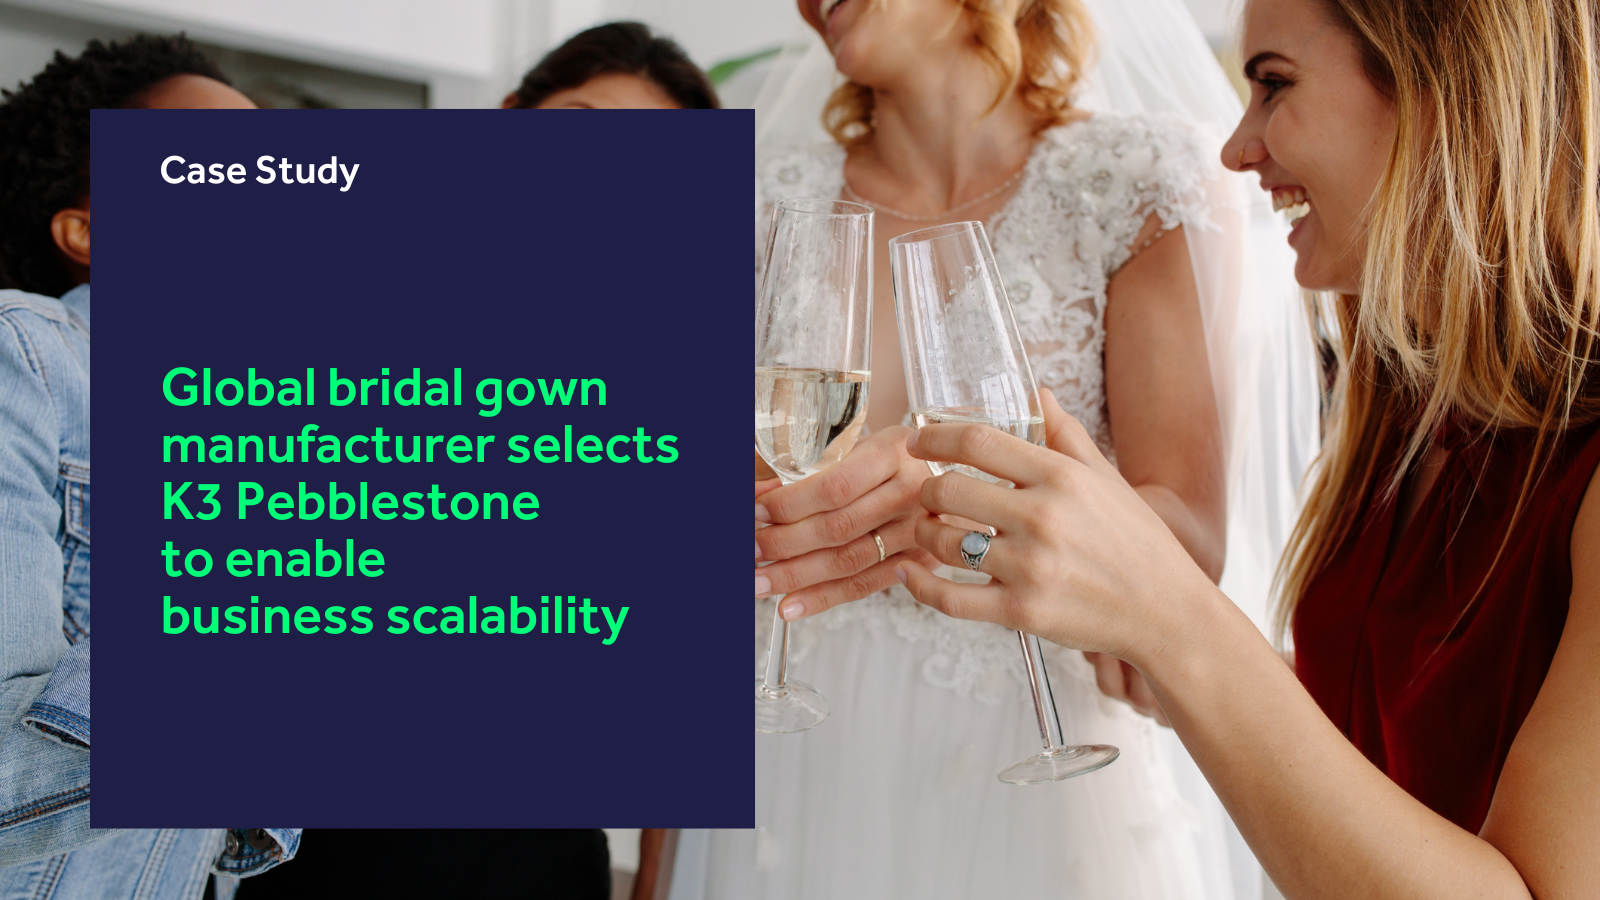 Global bridal gown manufacturer selects K3 Pebblestone to enable business scalability blog header